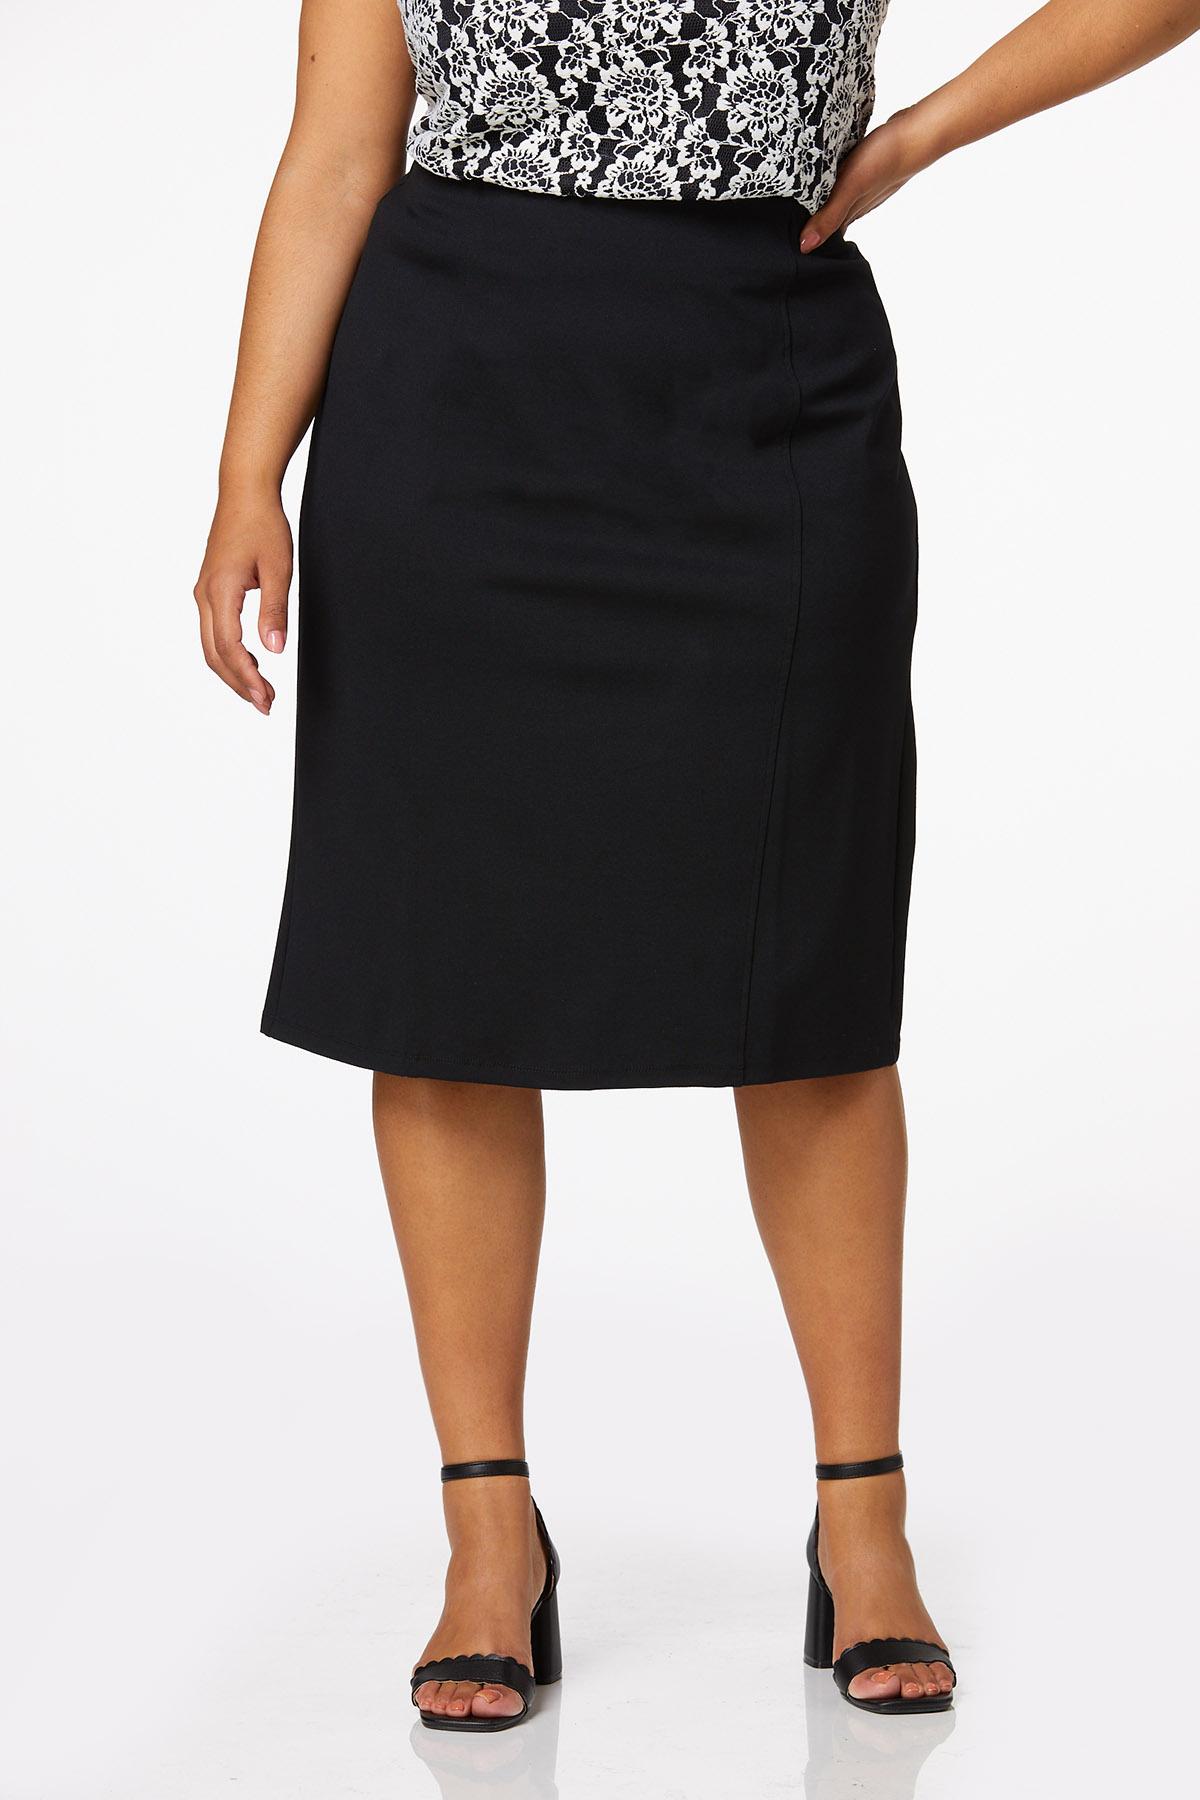 Cato Fashions  Cato Plus Size Ponte Pull-On Skirt